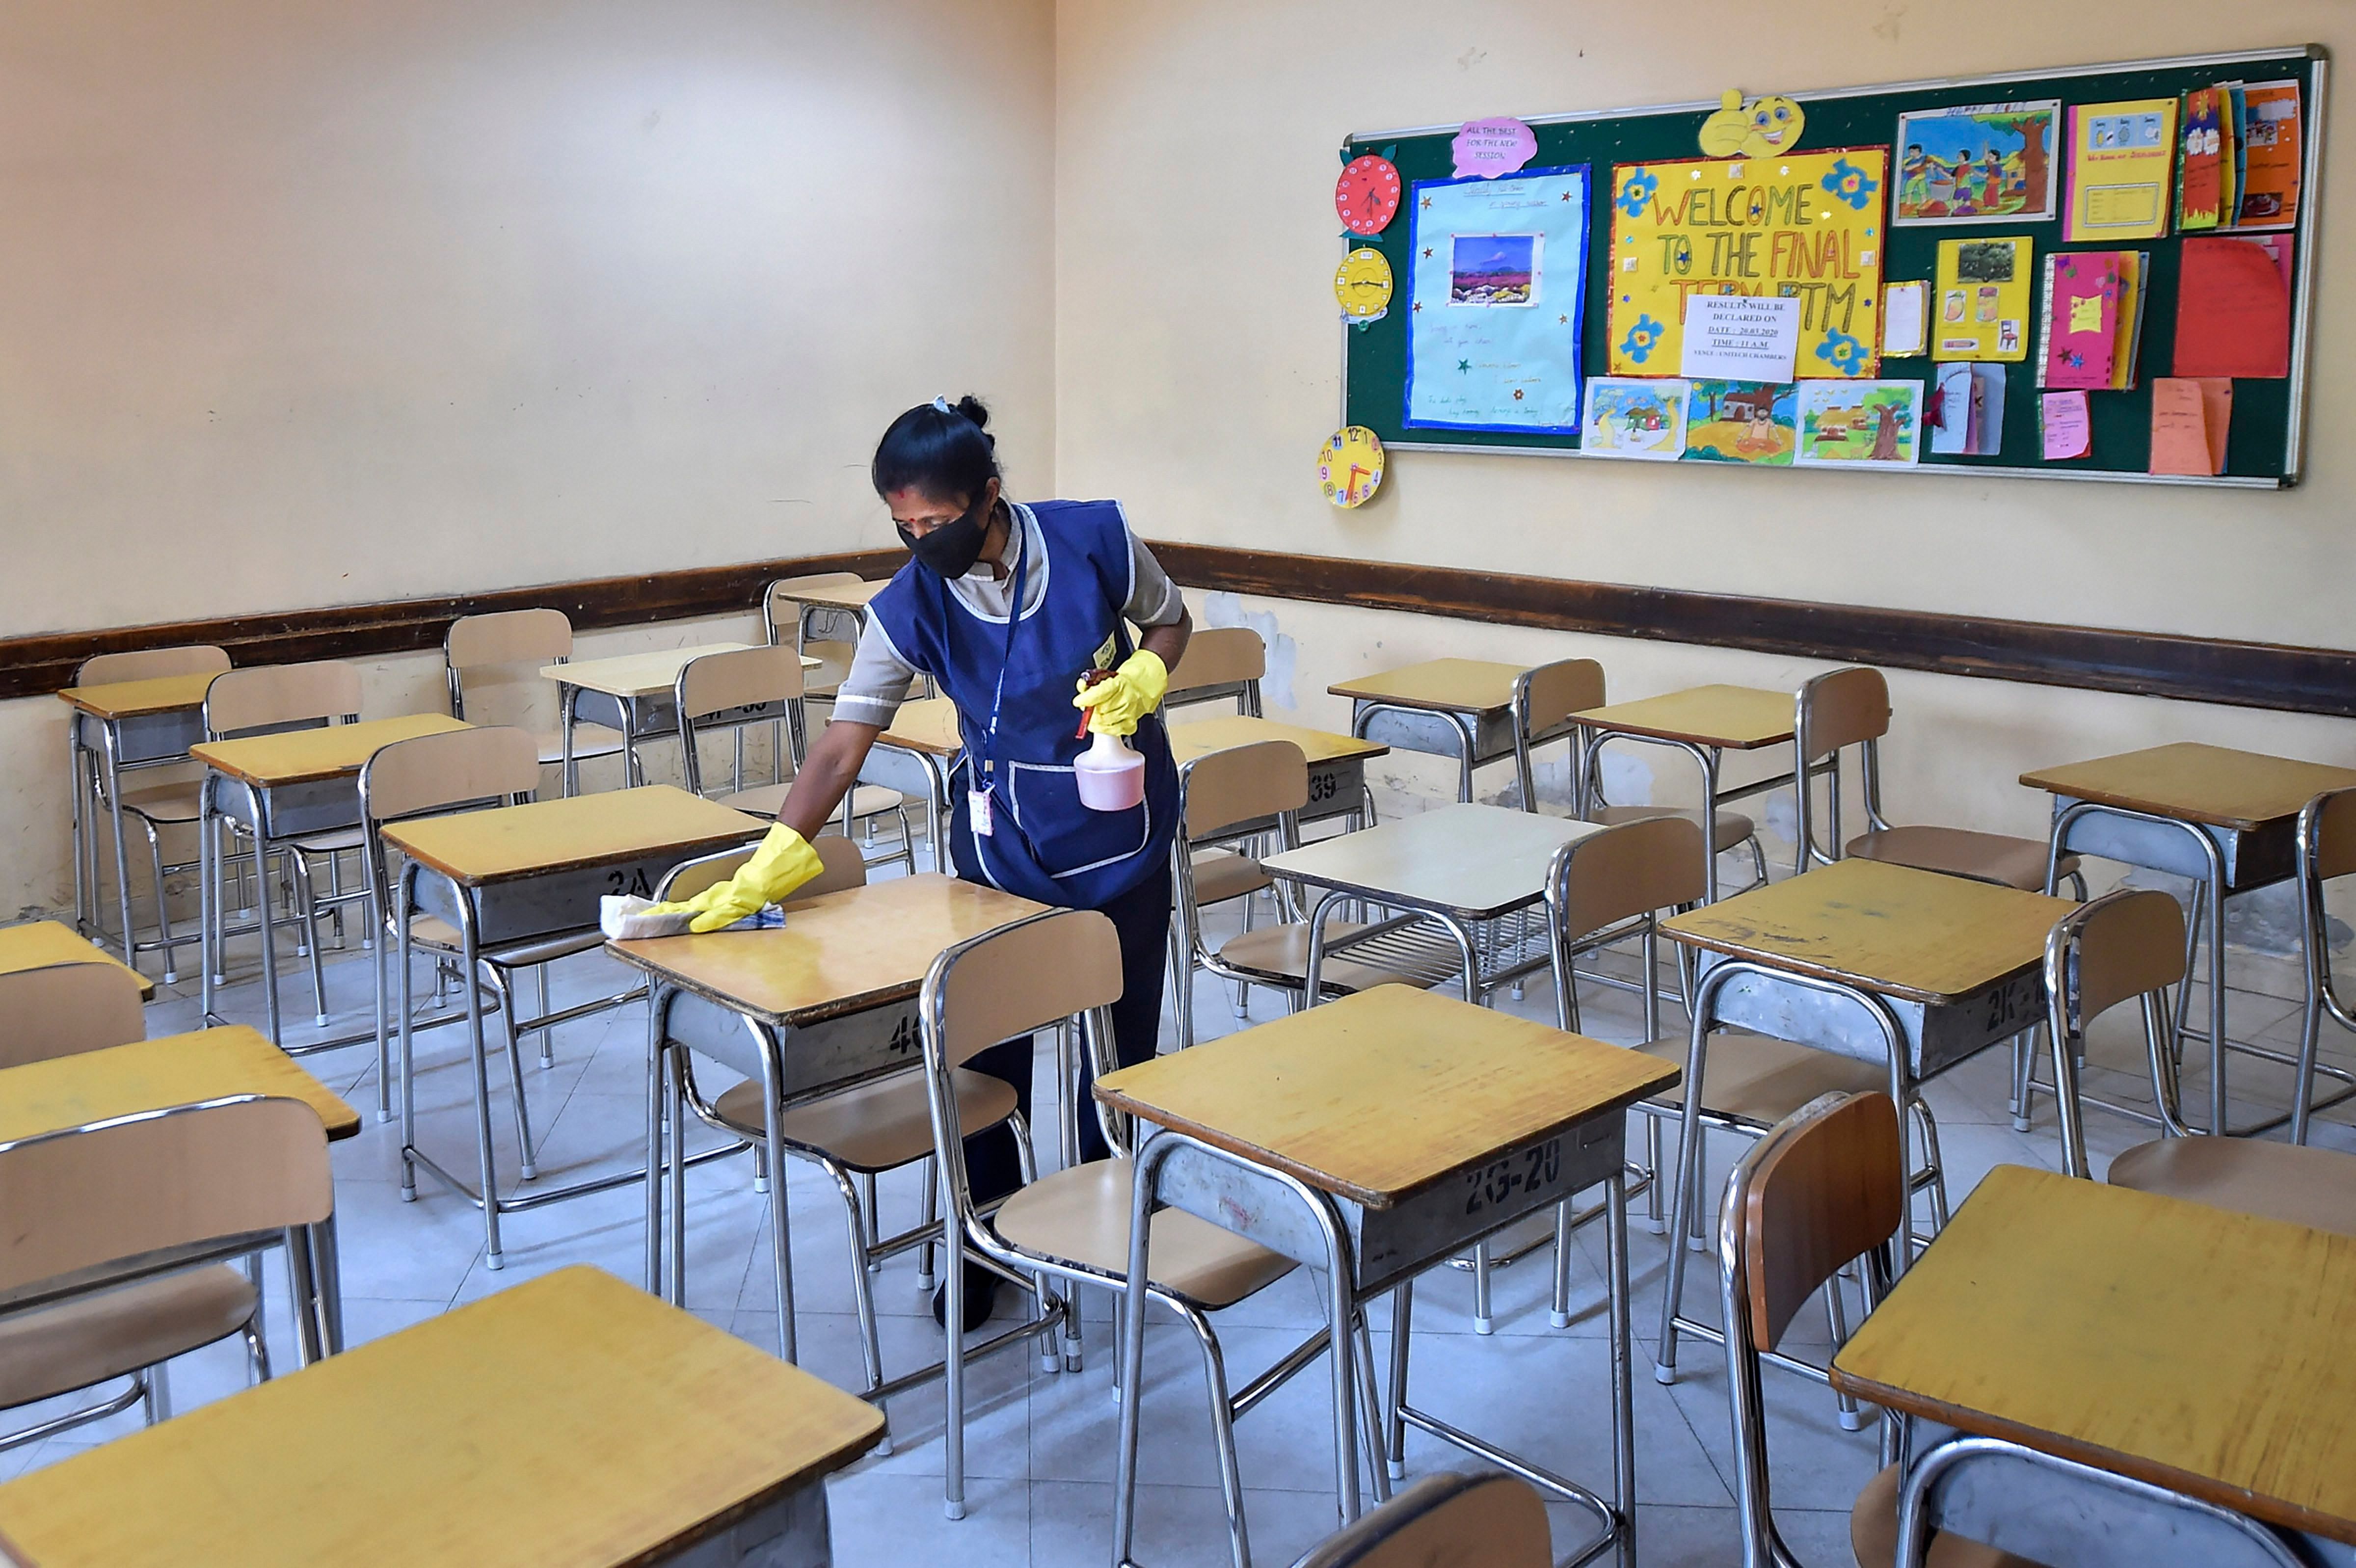 A worker disinfects a classroom in the wake of novel coronavirus, at a school in Kolkata. (Credit: PTI)